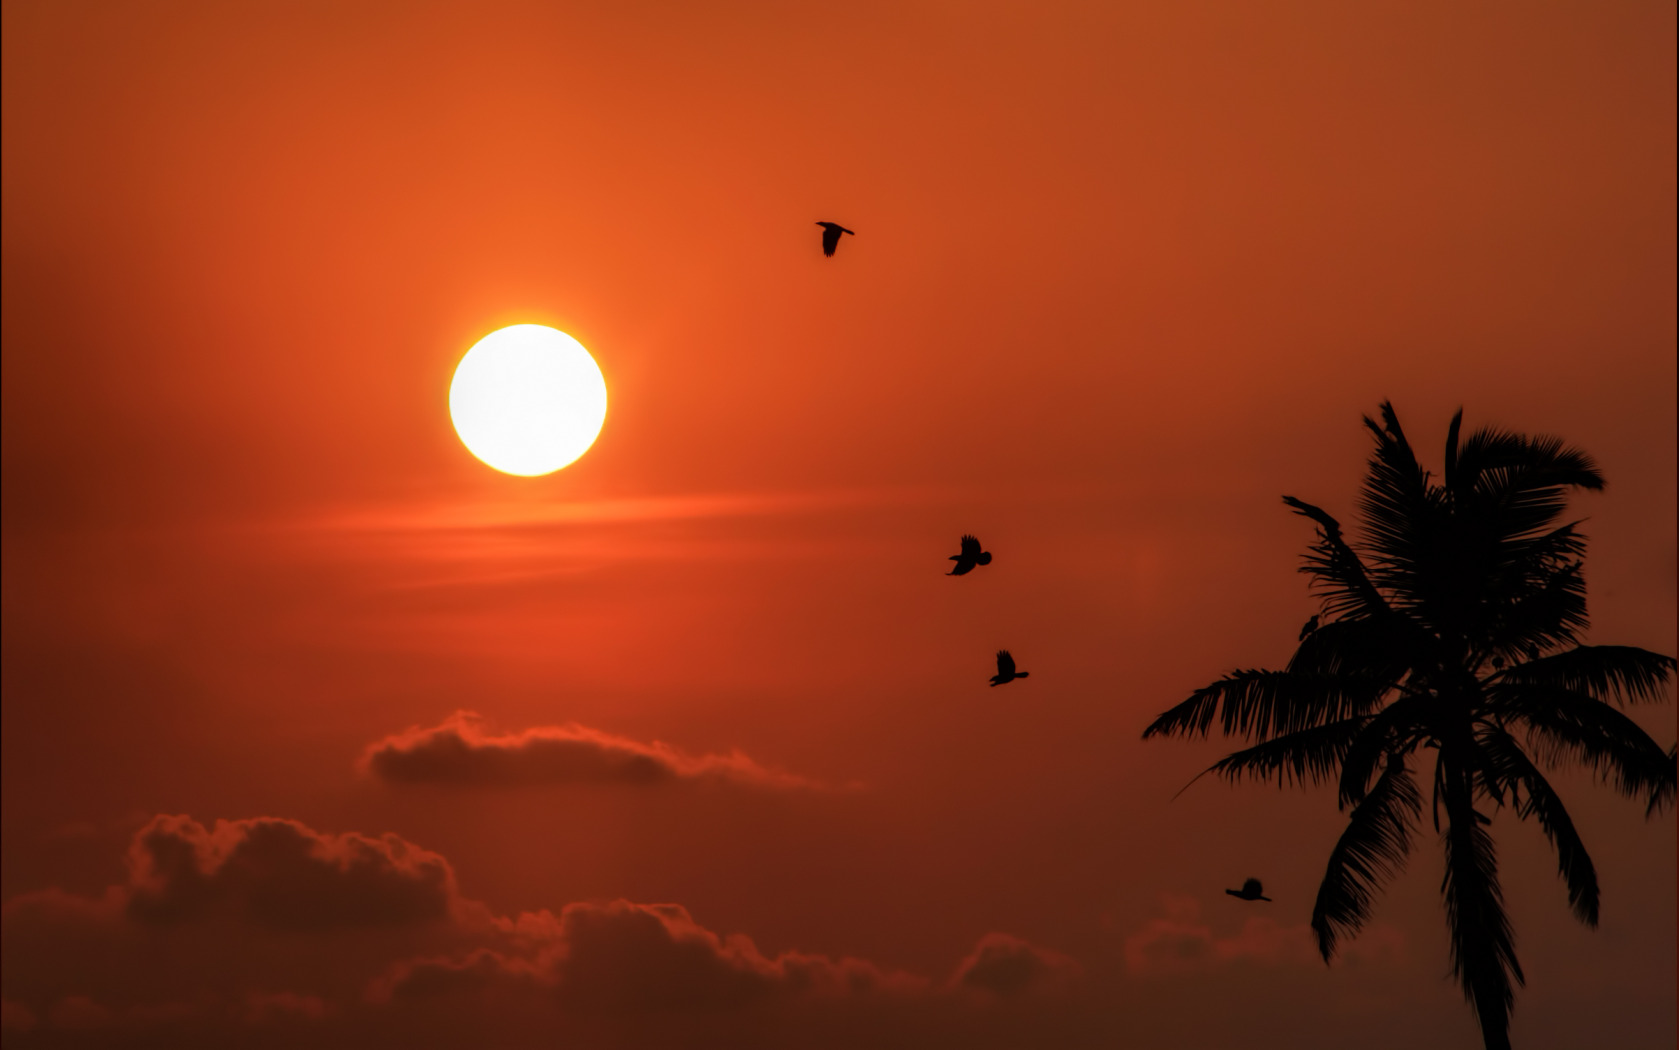 birds-flying-at-sunset-a-palm-tree-1680x1050-wide-wallpapers.net.jpg